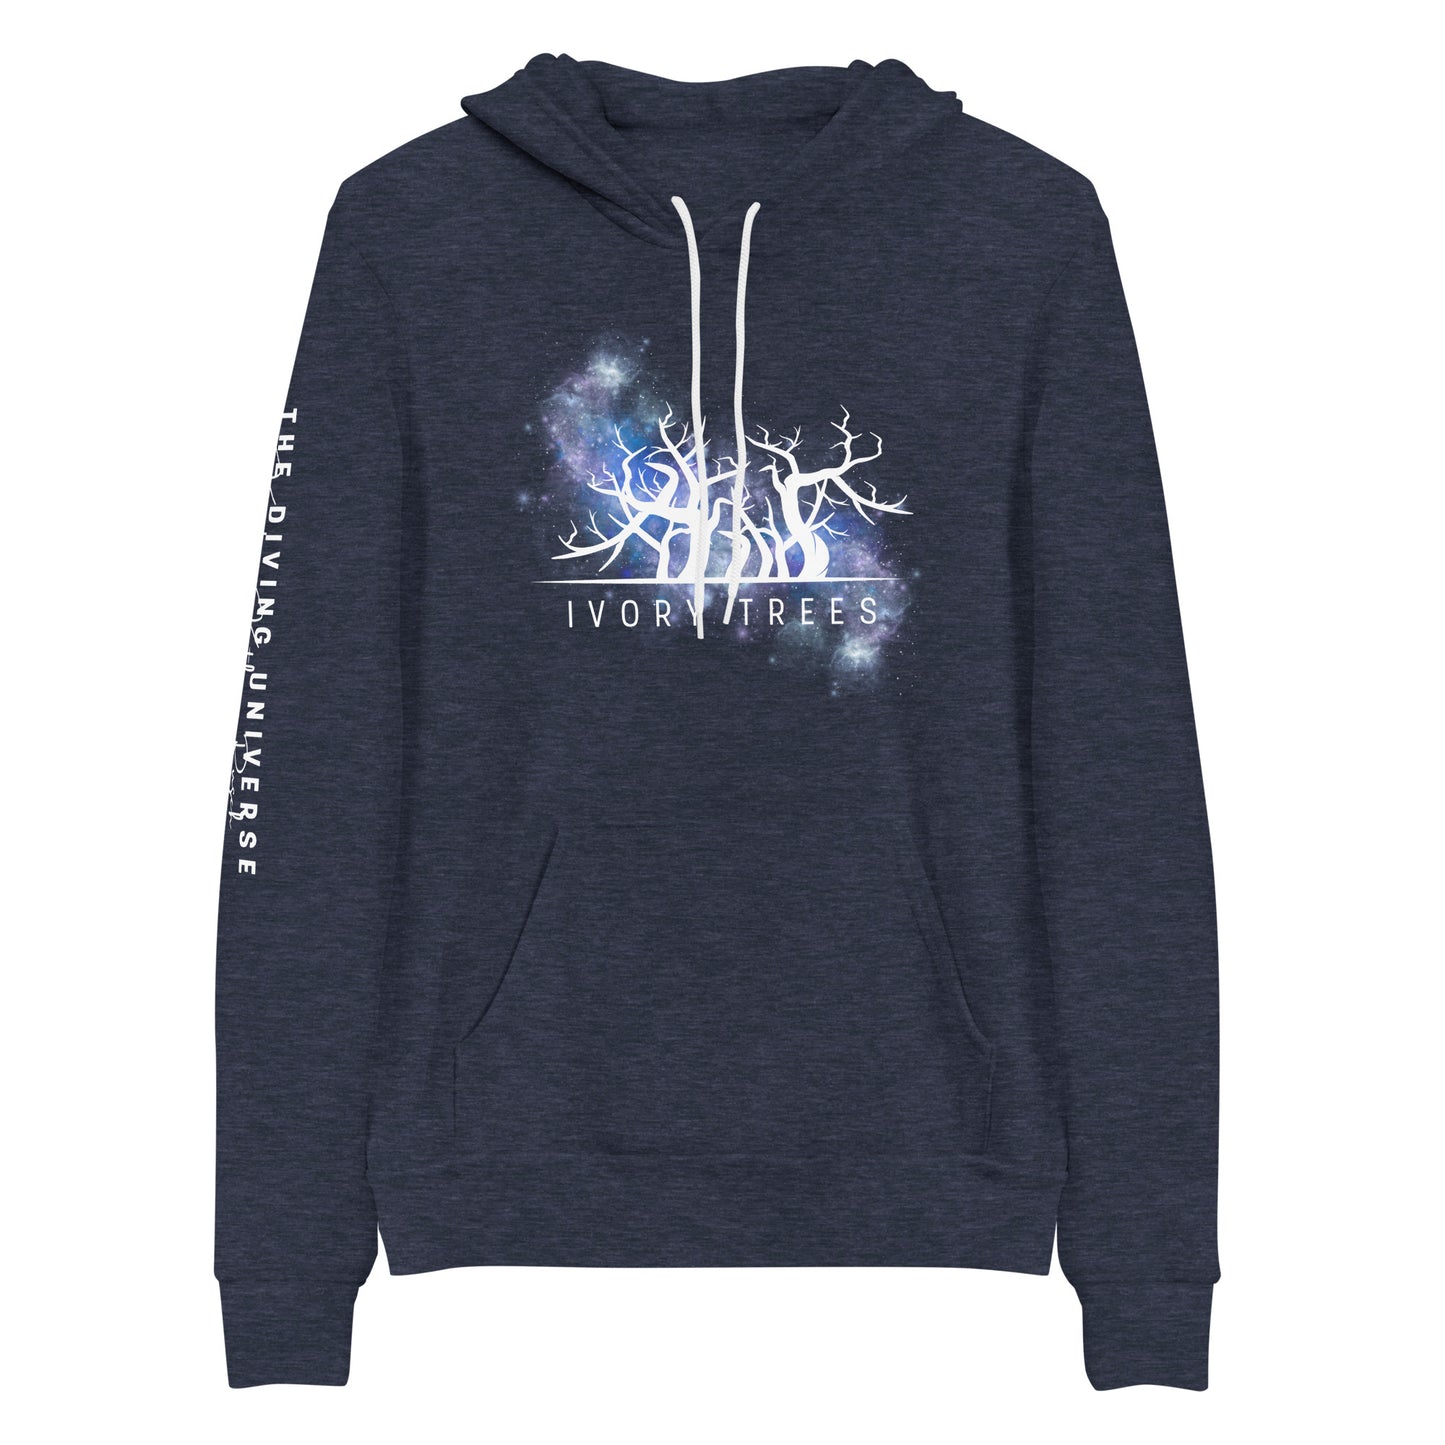 IVORY TREES NEBULA Hoodie - The Diving Universe by Kristine Kathryn Rusch